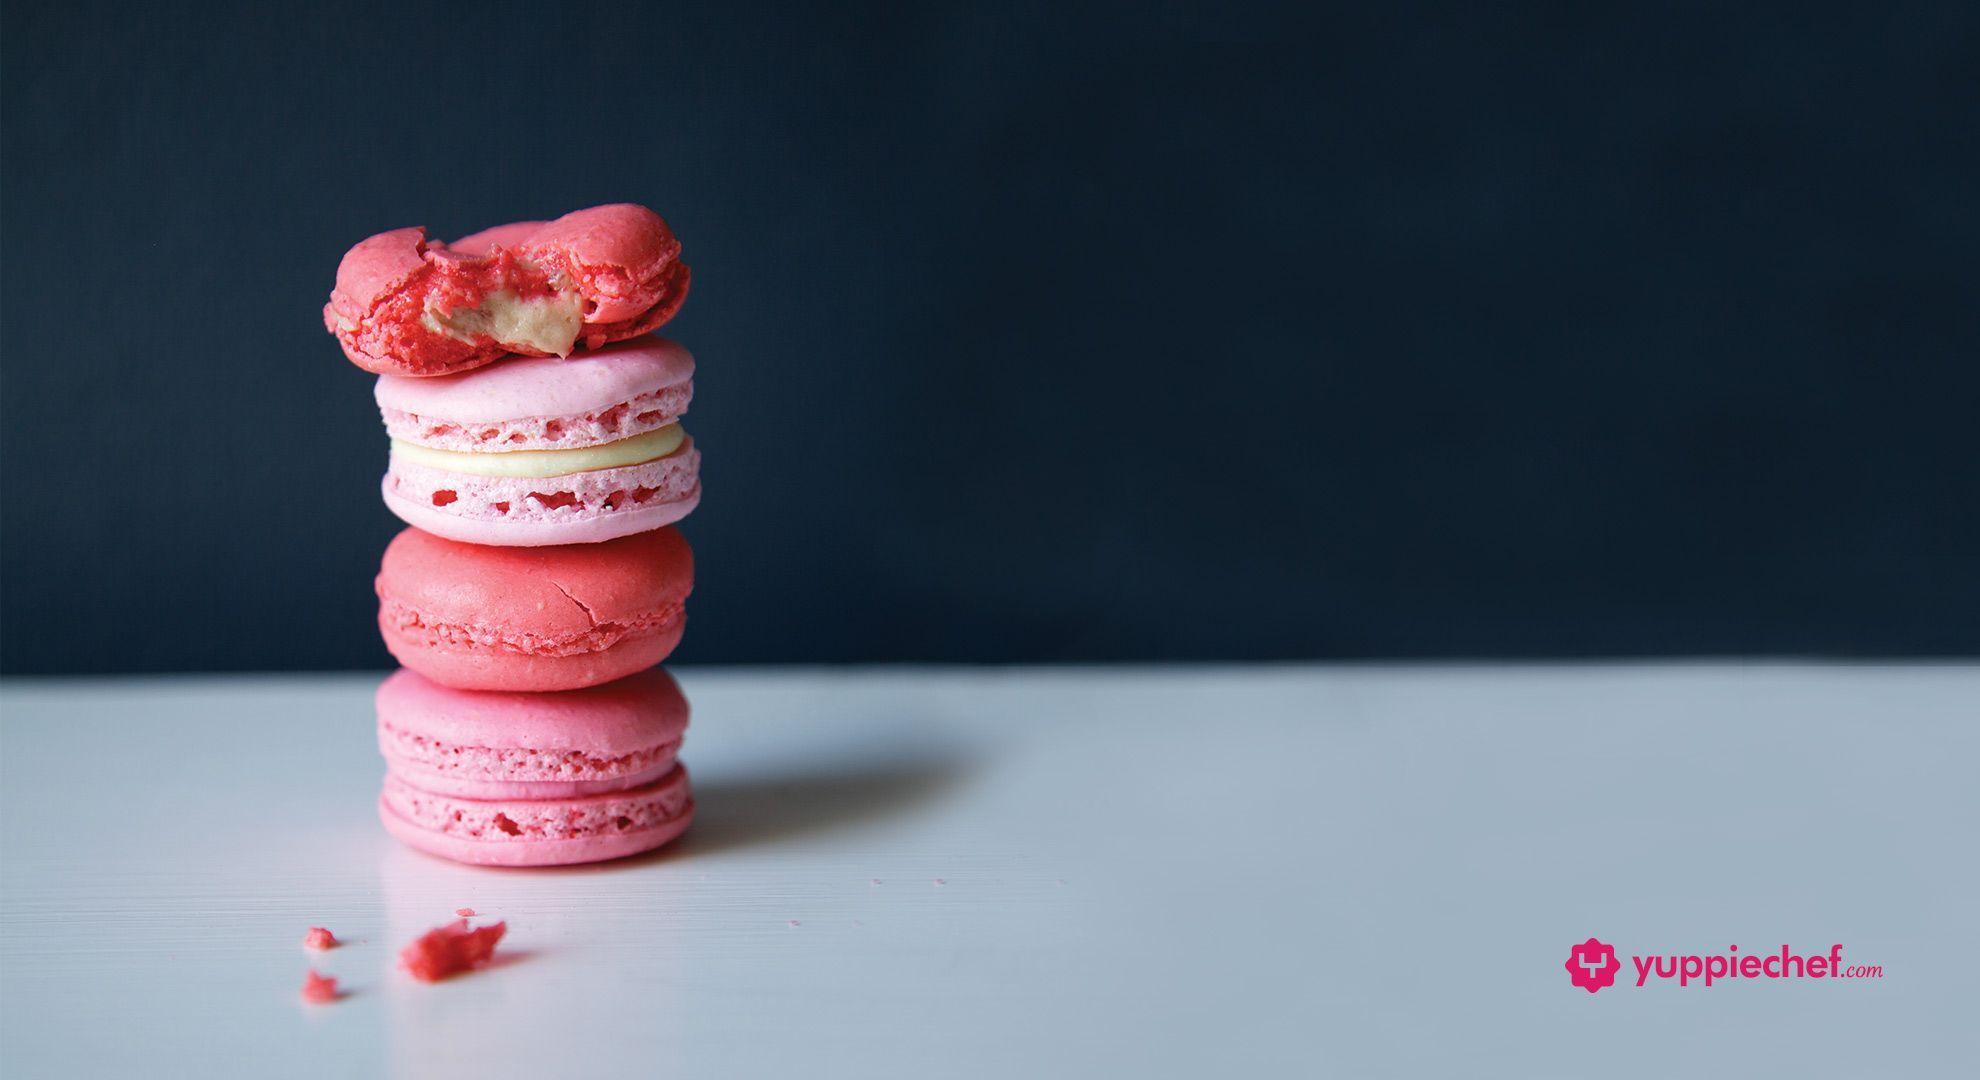 Mad for macarons? Free wallpaper for August